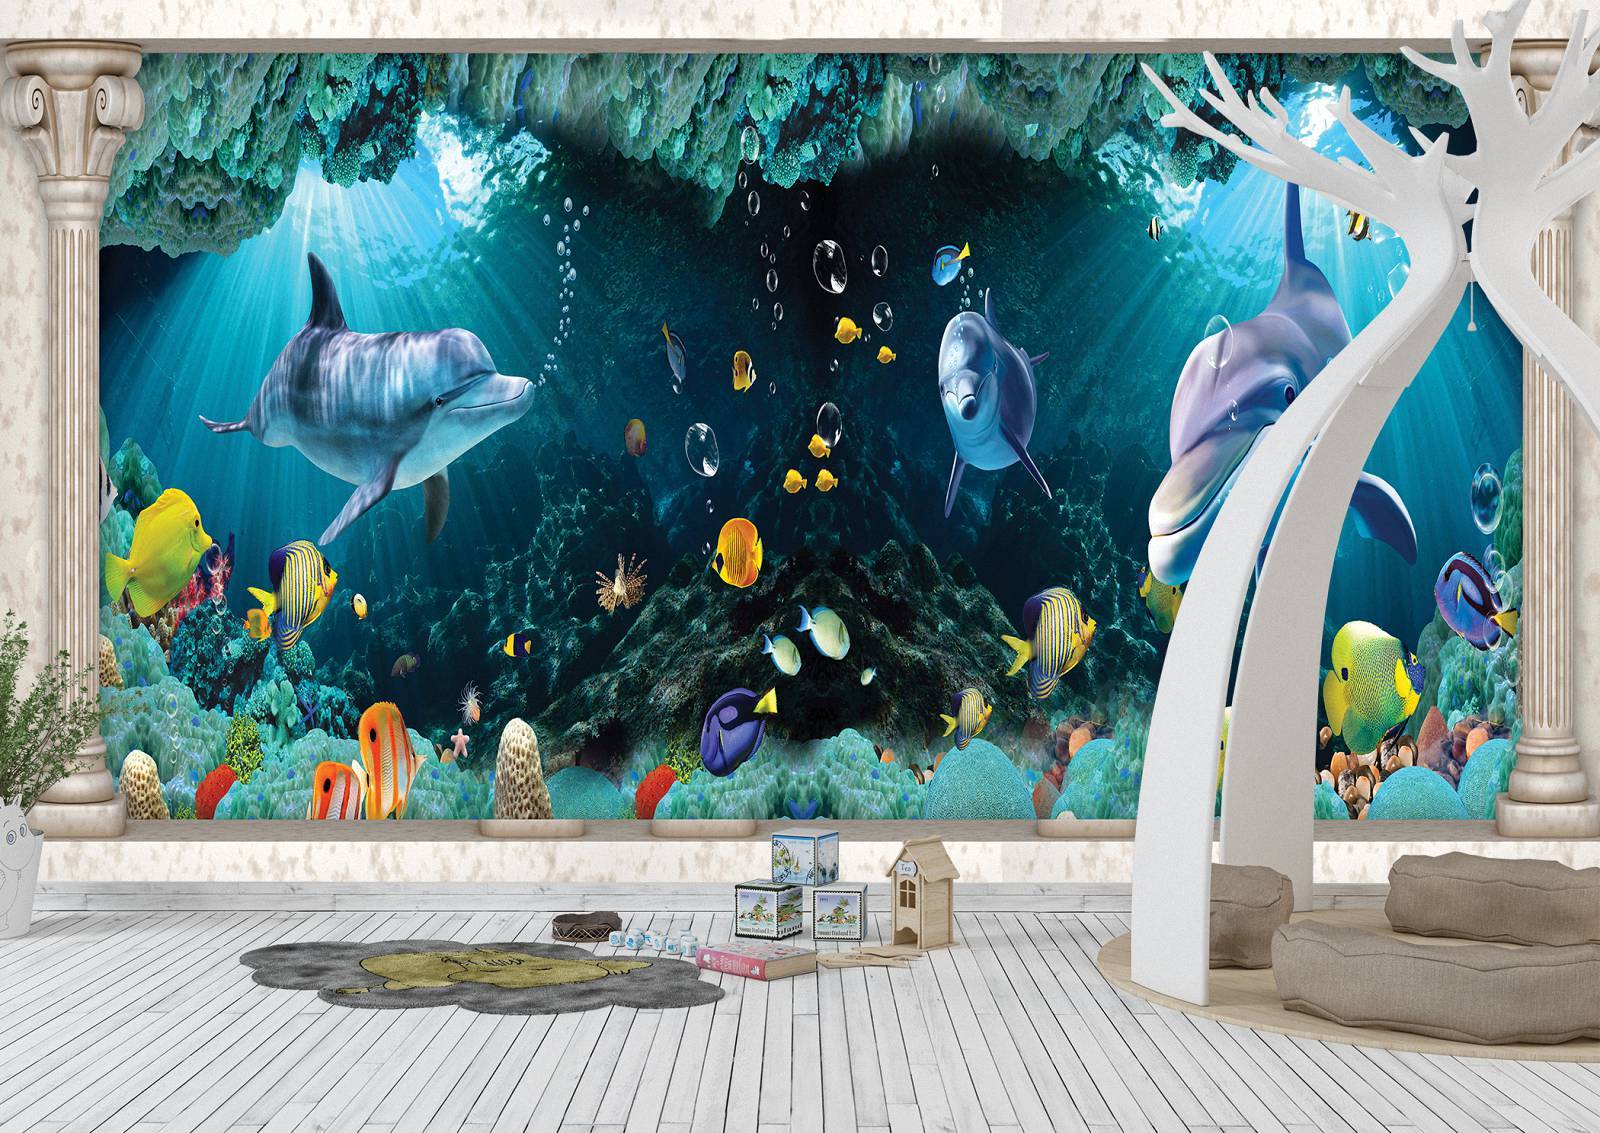 Underwater Fishes Live Theme Wall Mural Photo Wallpaper UV Print Decal Art Décor